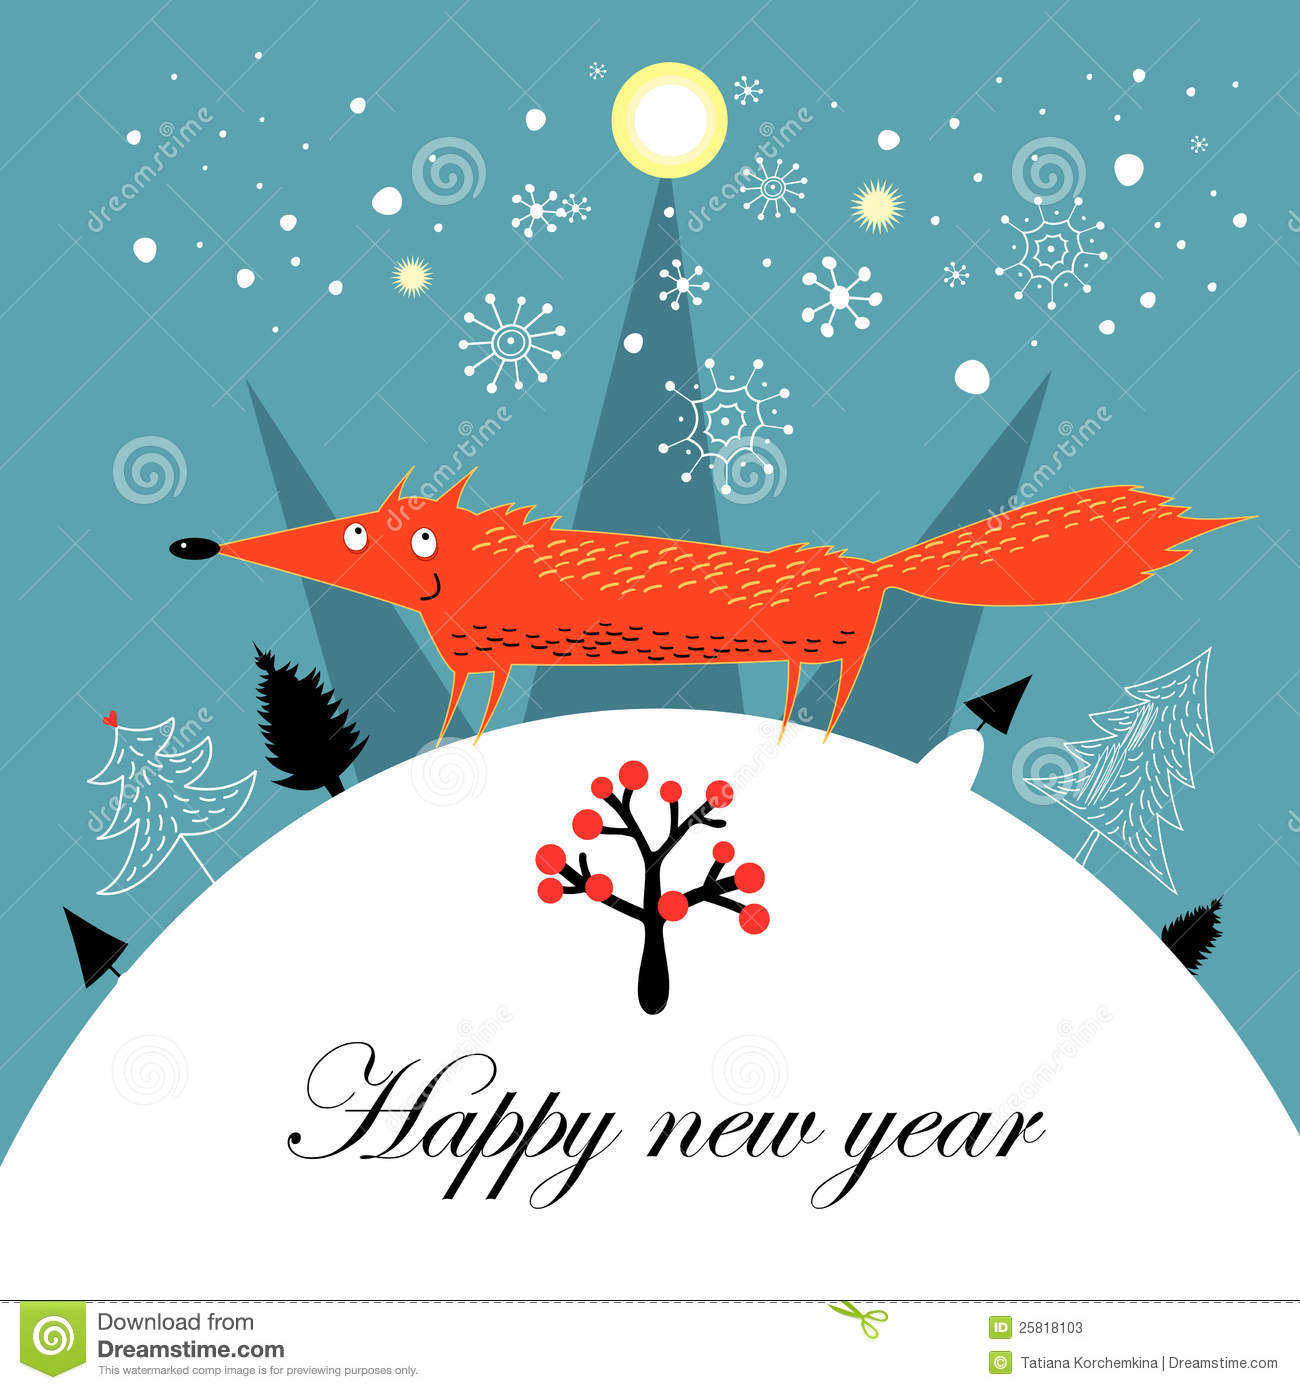 Bright Christmas Card Greeting With A Fox On A Blue Background With